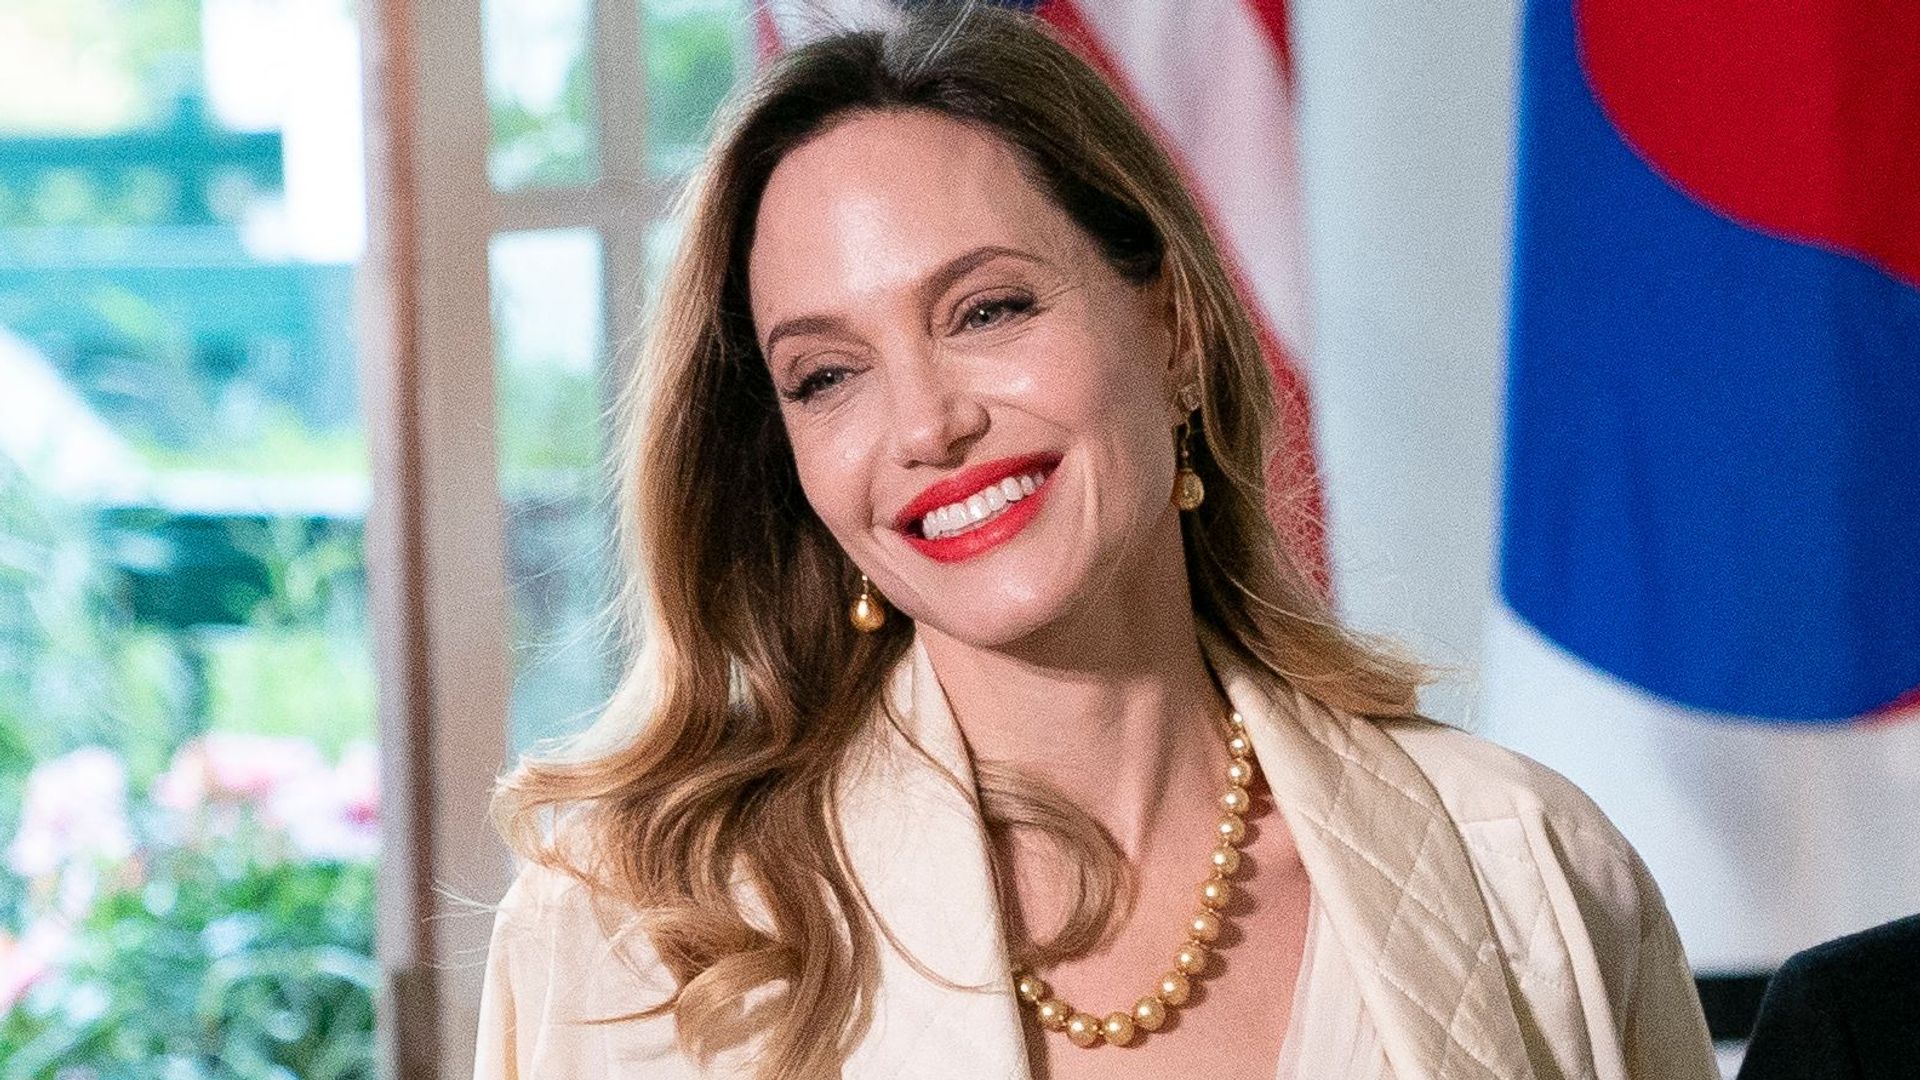 Angelina Jolie at the White House with her son Maddox